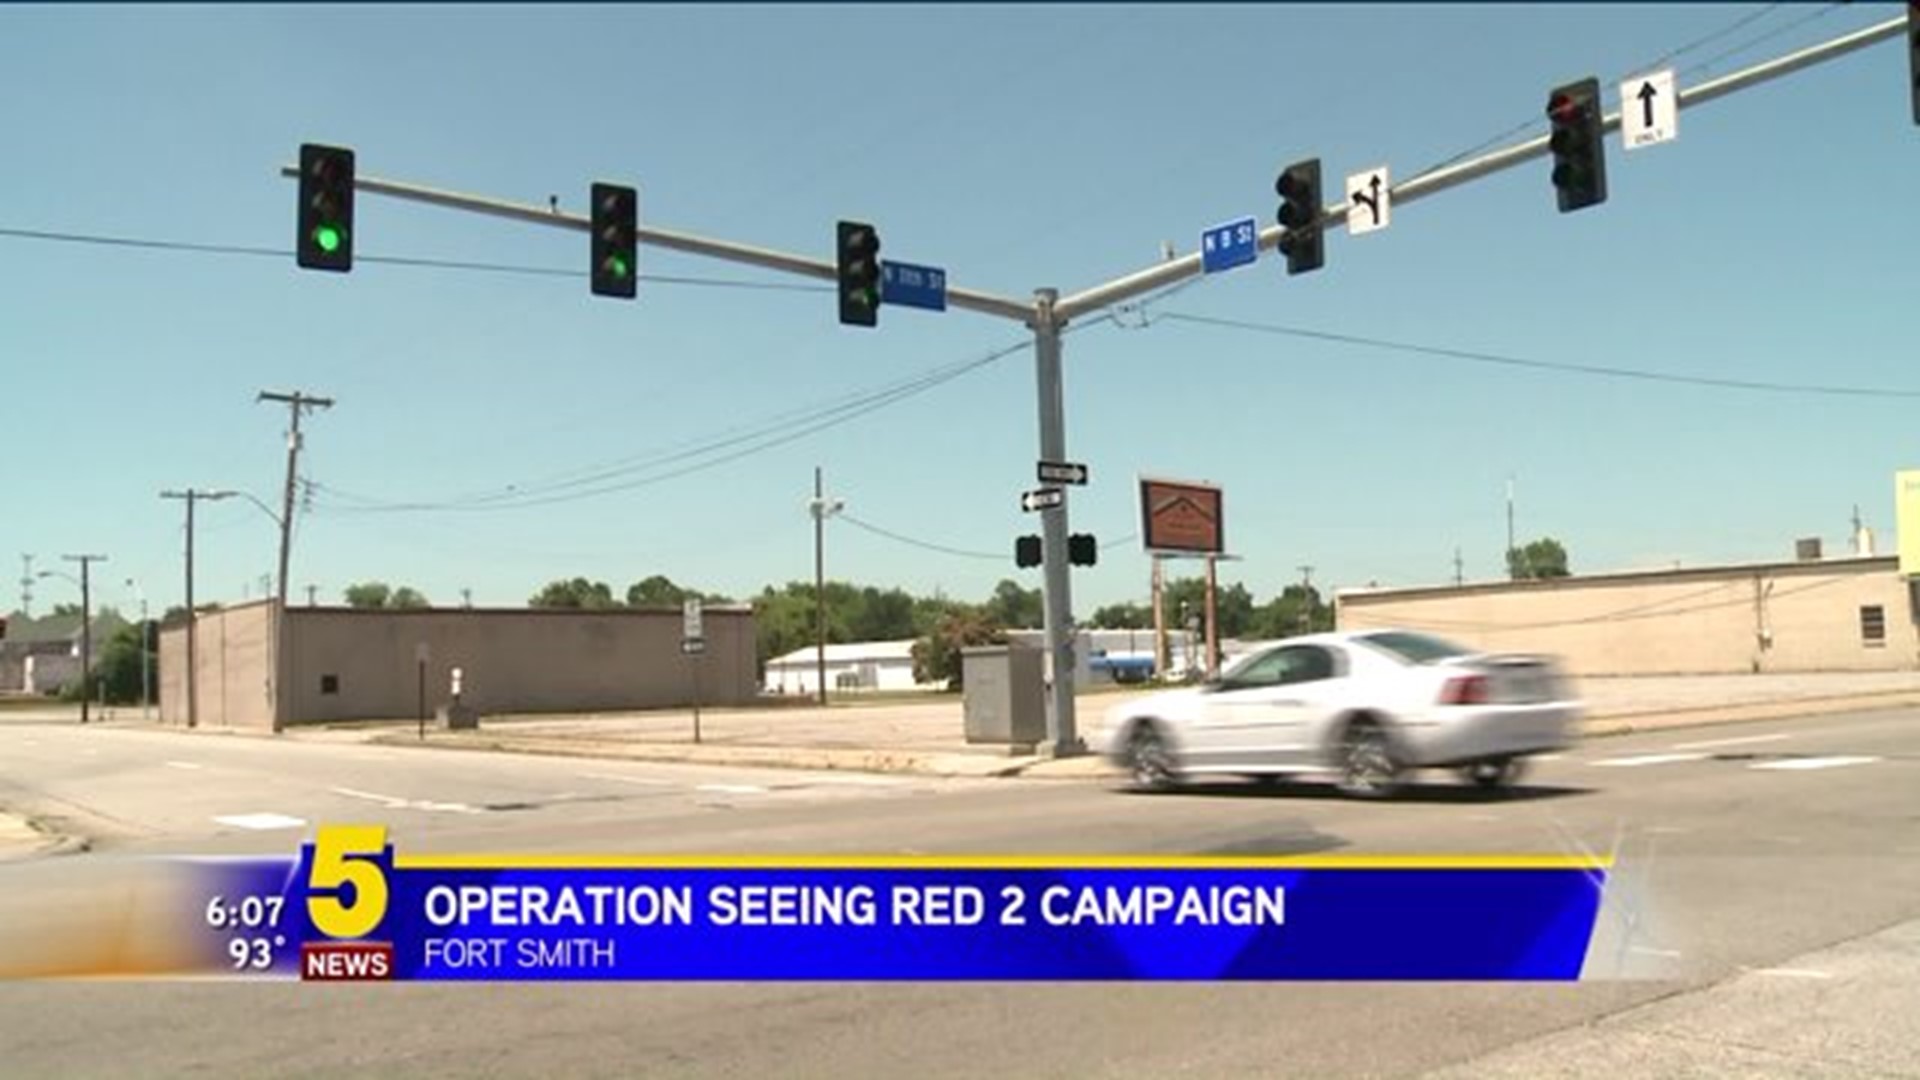 Operation Seeing Red 2 Campaign